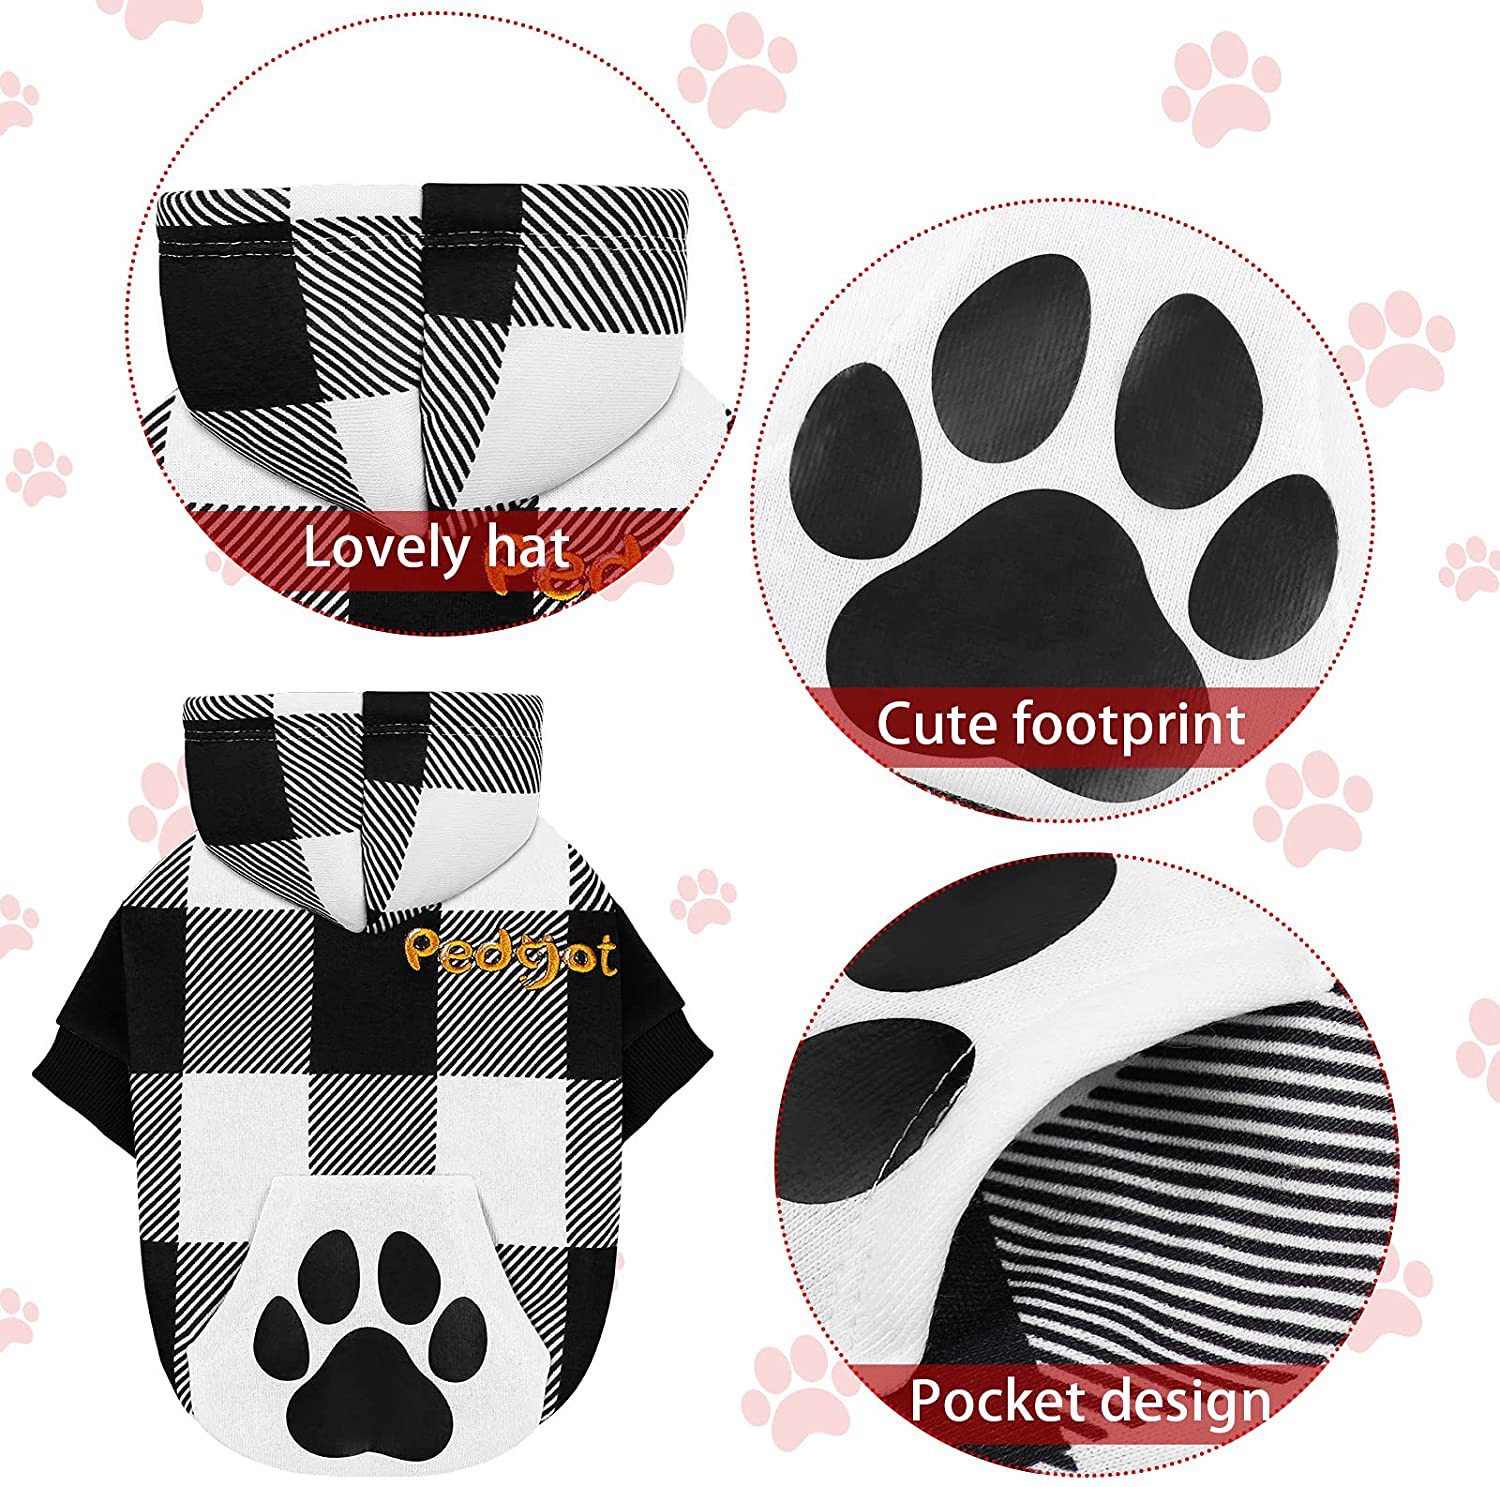 Pedgot Plaid Dog Hoodie Pet Clothes with Hat Pet Sweaters for Dogs Puppies Cats Clothes with Dog Footprints Patterns Pocket, Warm, Soft and Breathable